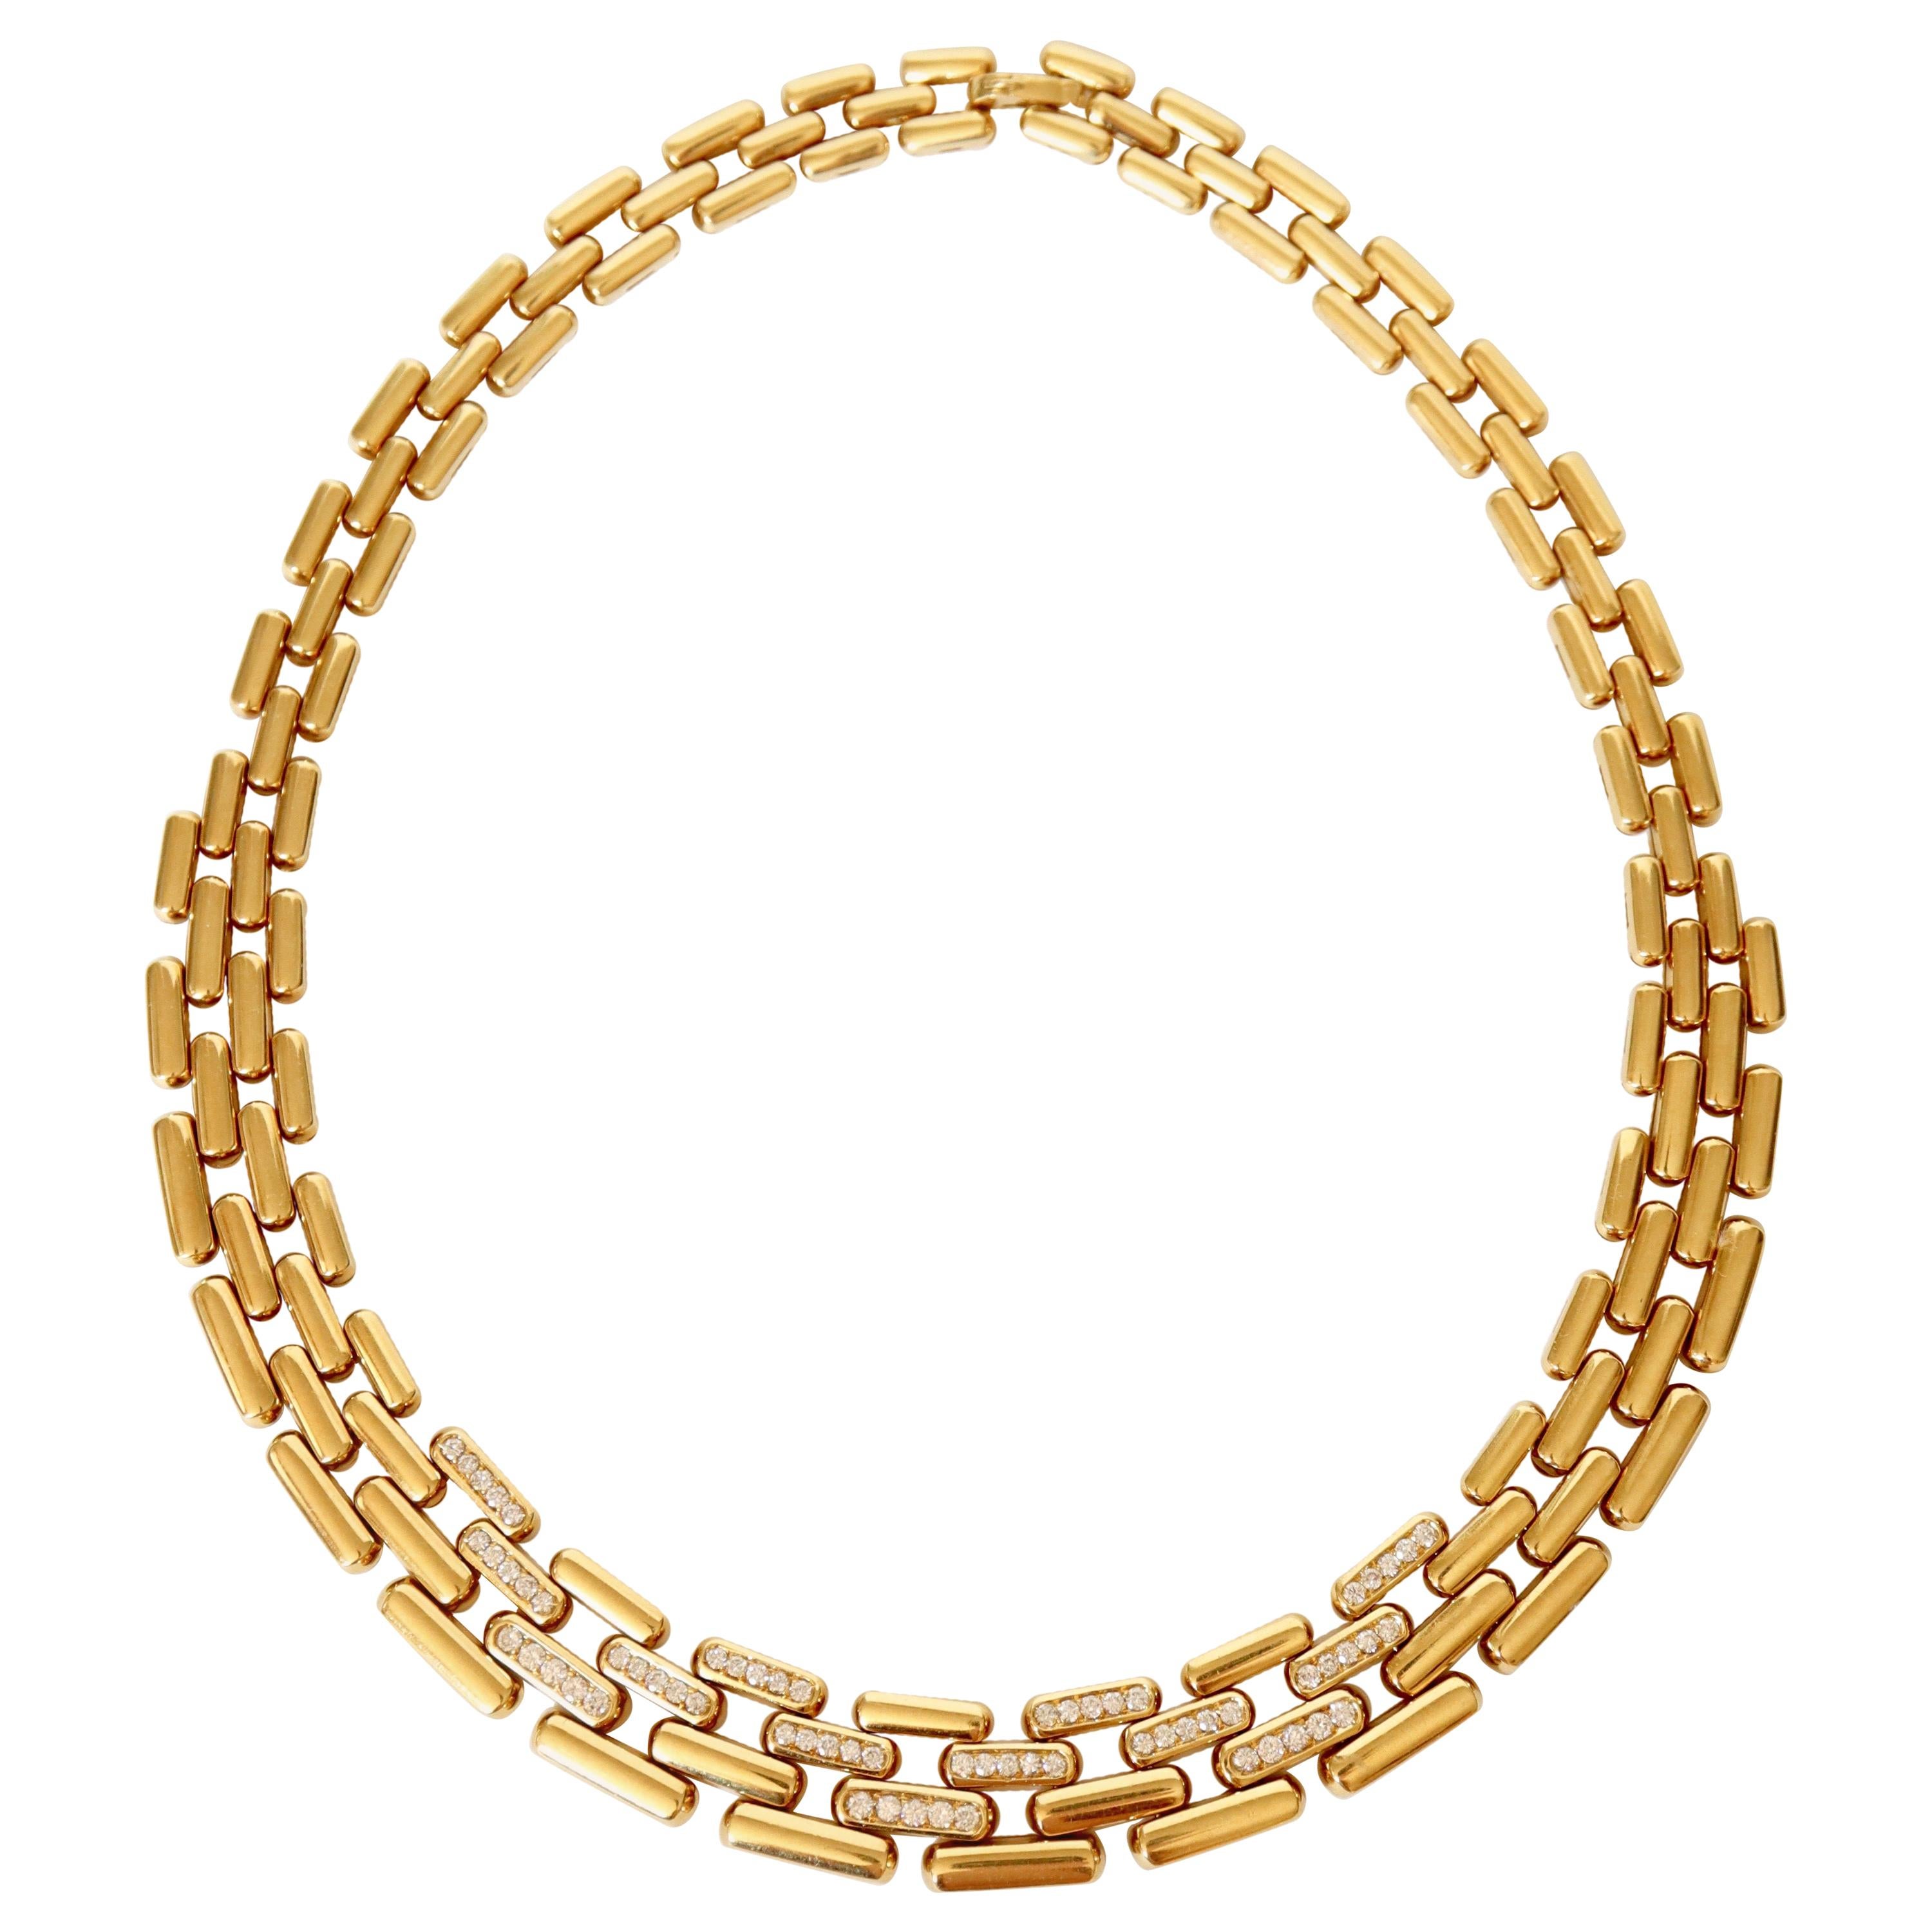 Fred Tank 'Panther' Mesh Necklace in 18 Carat Yellow Gold and Diamonds